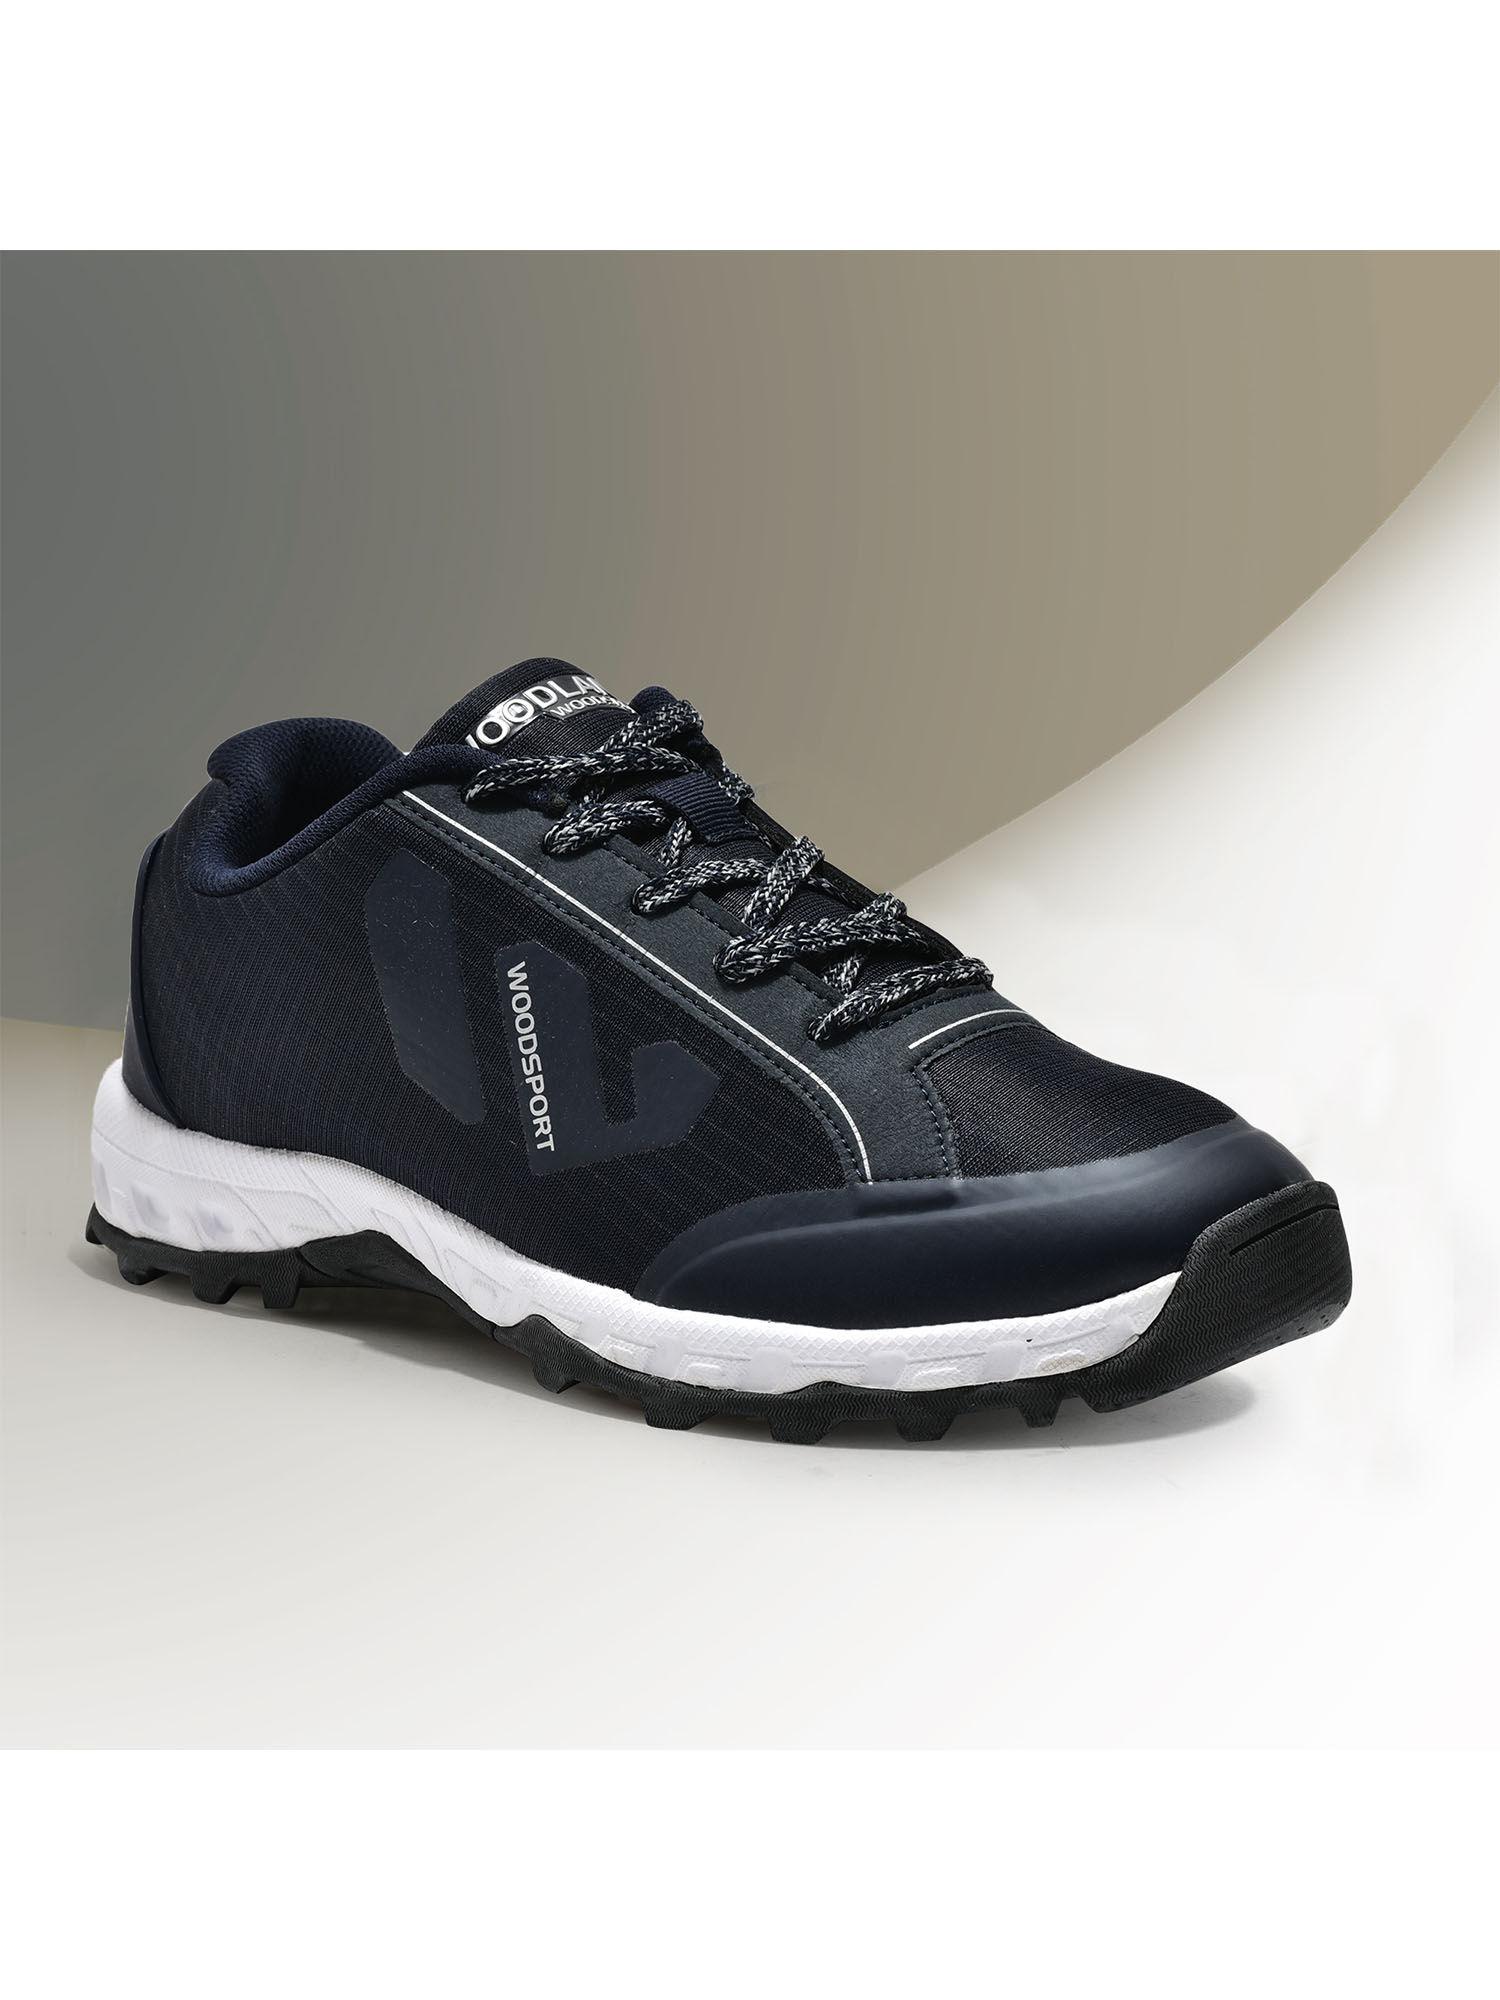 woodsport mens navy lace up sports shoes